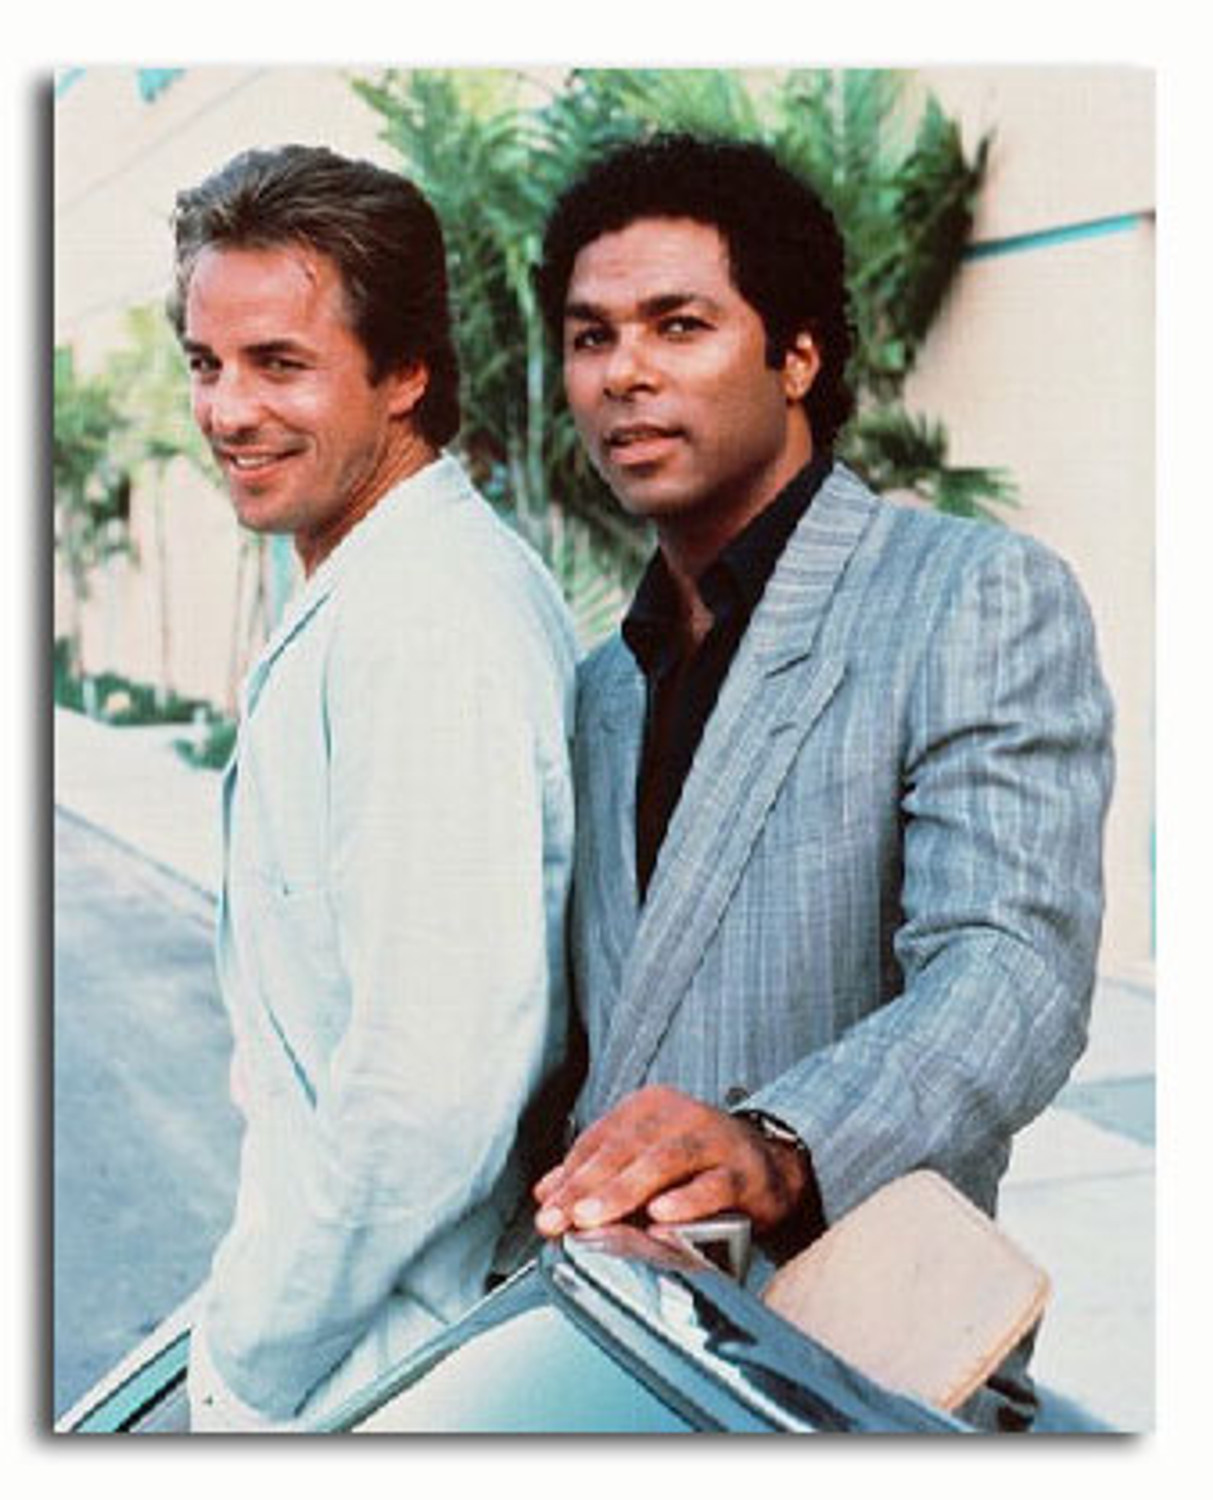 SS3154268) Television picture of Miami Vice buy celebrity photos